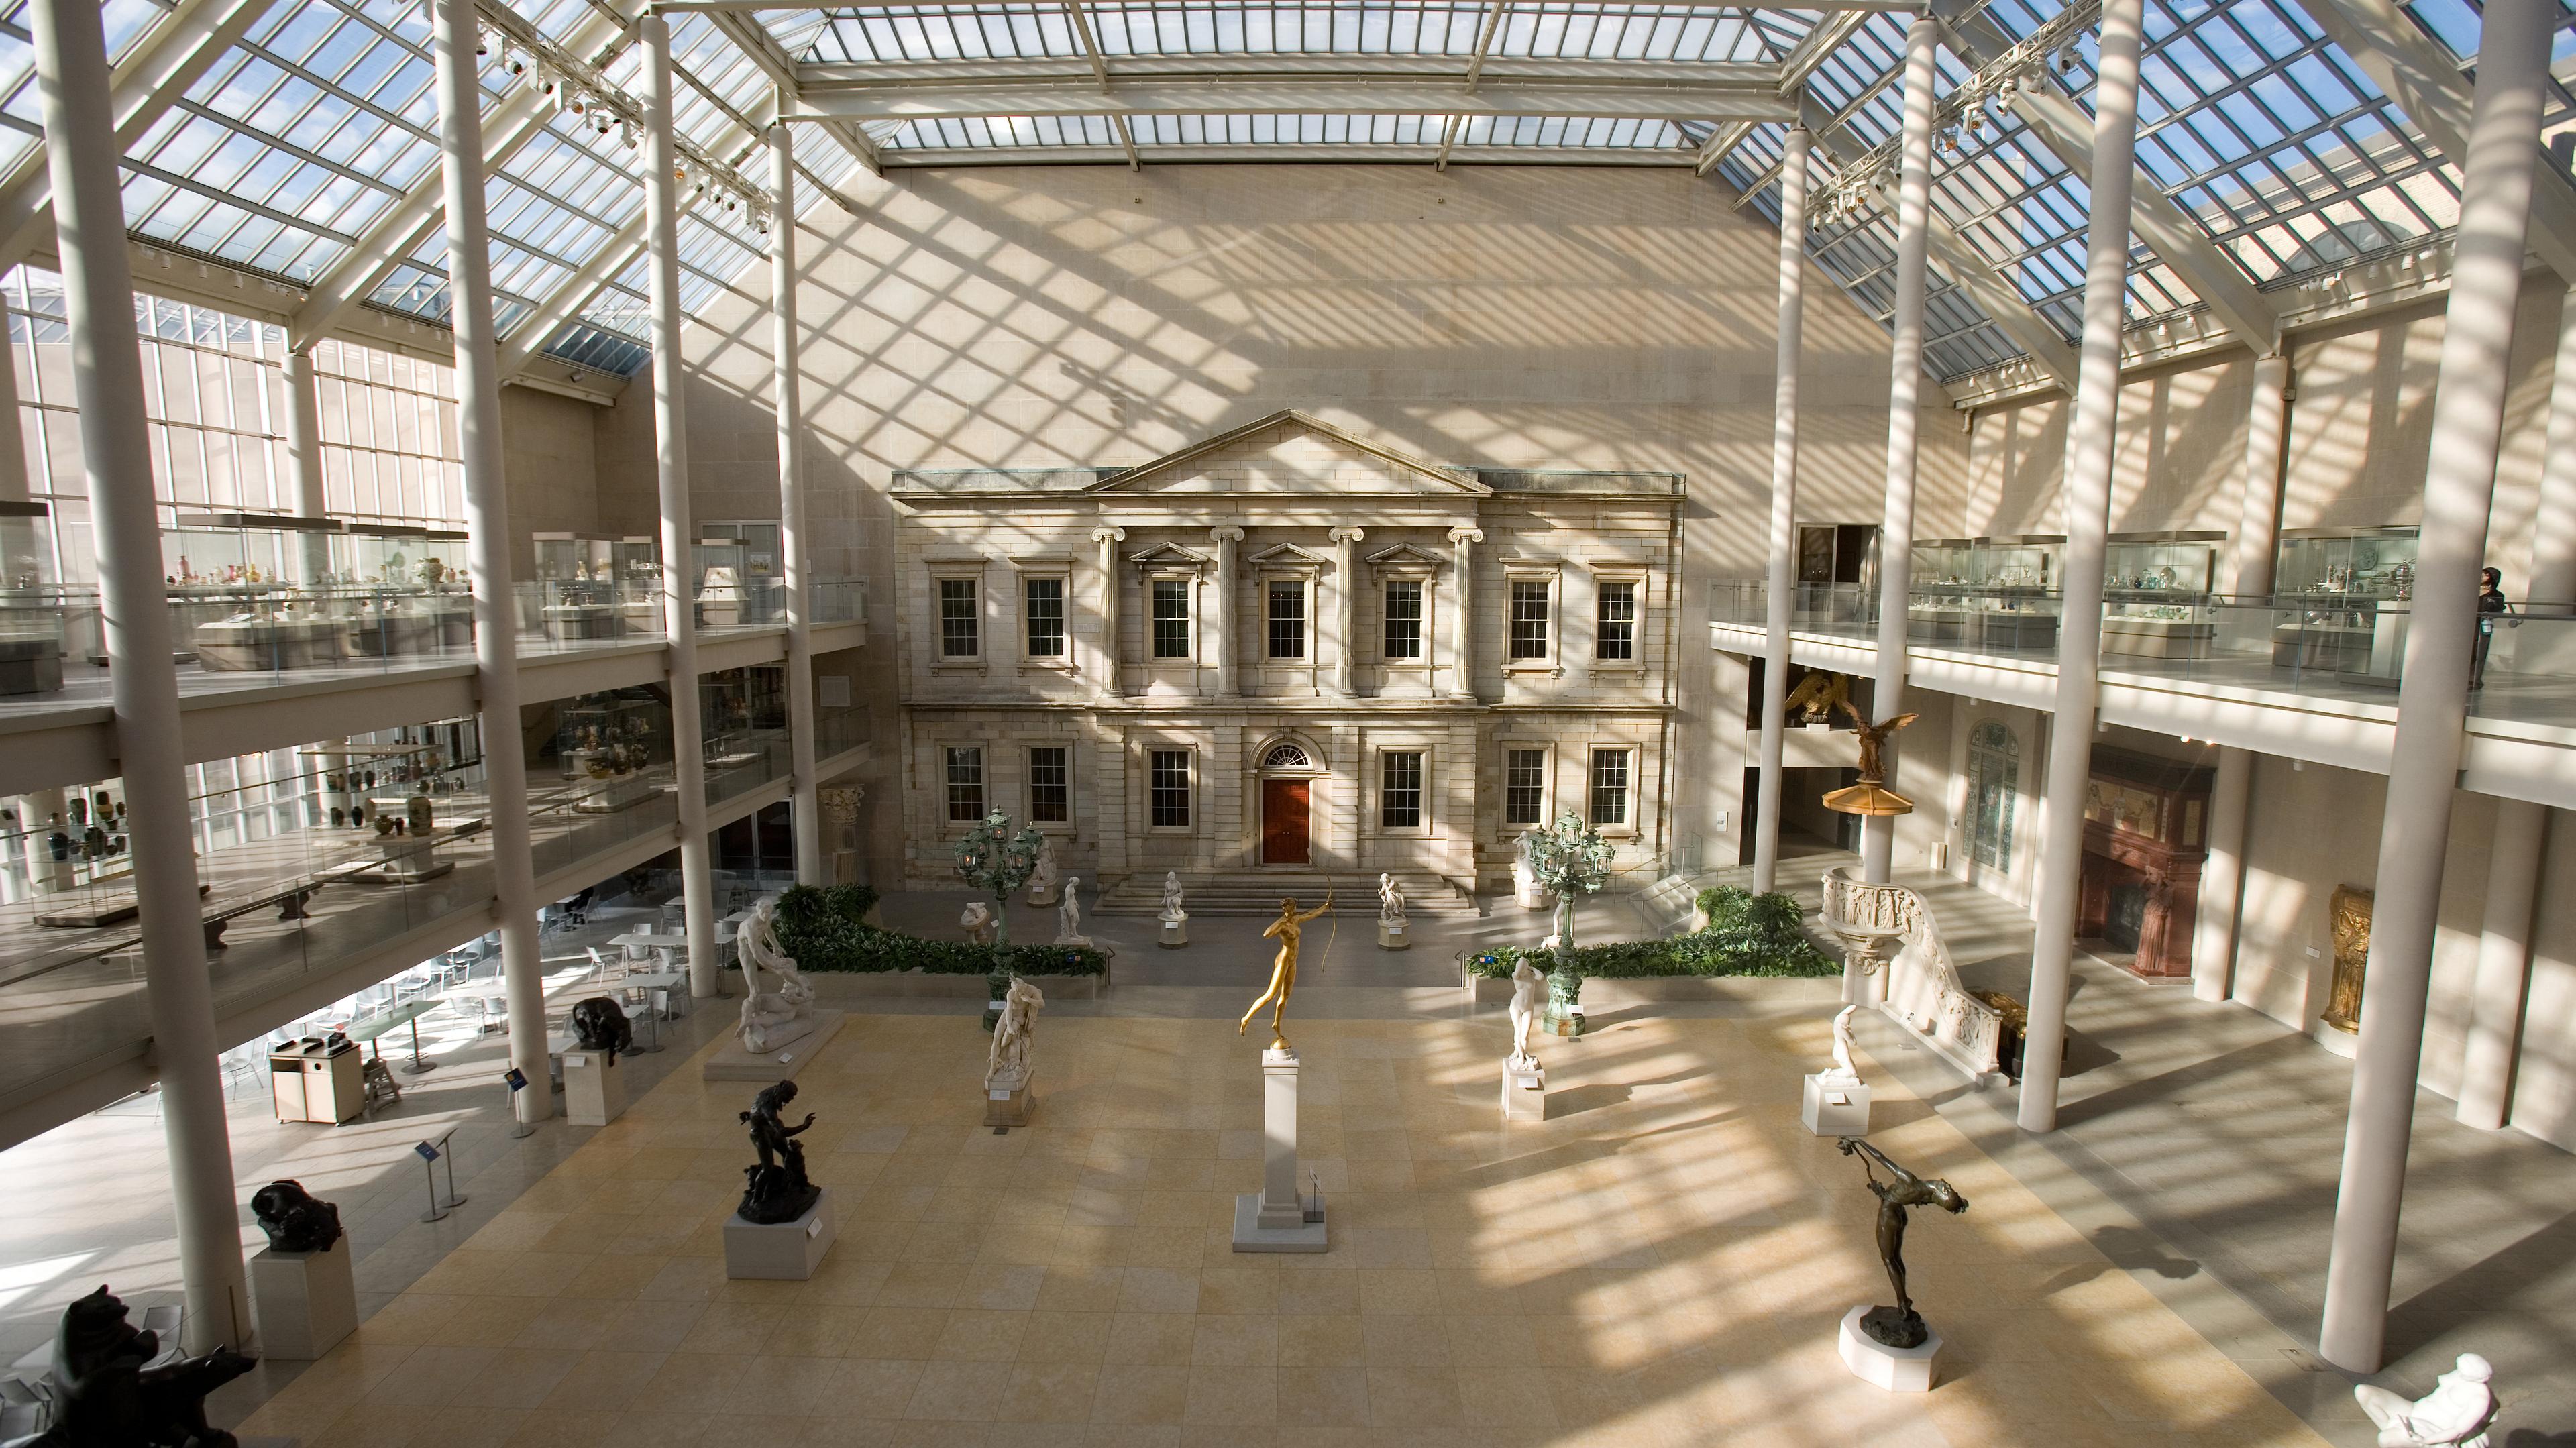 Sculptures displayed throughout a courtyard, neoclassical facade of a building is in the background